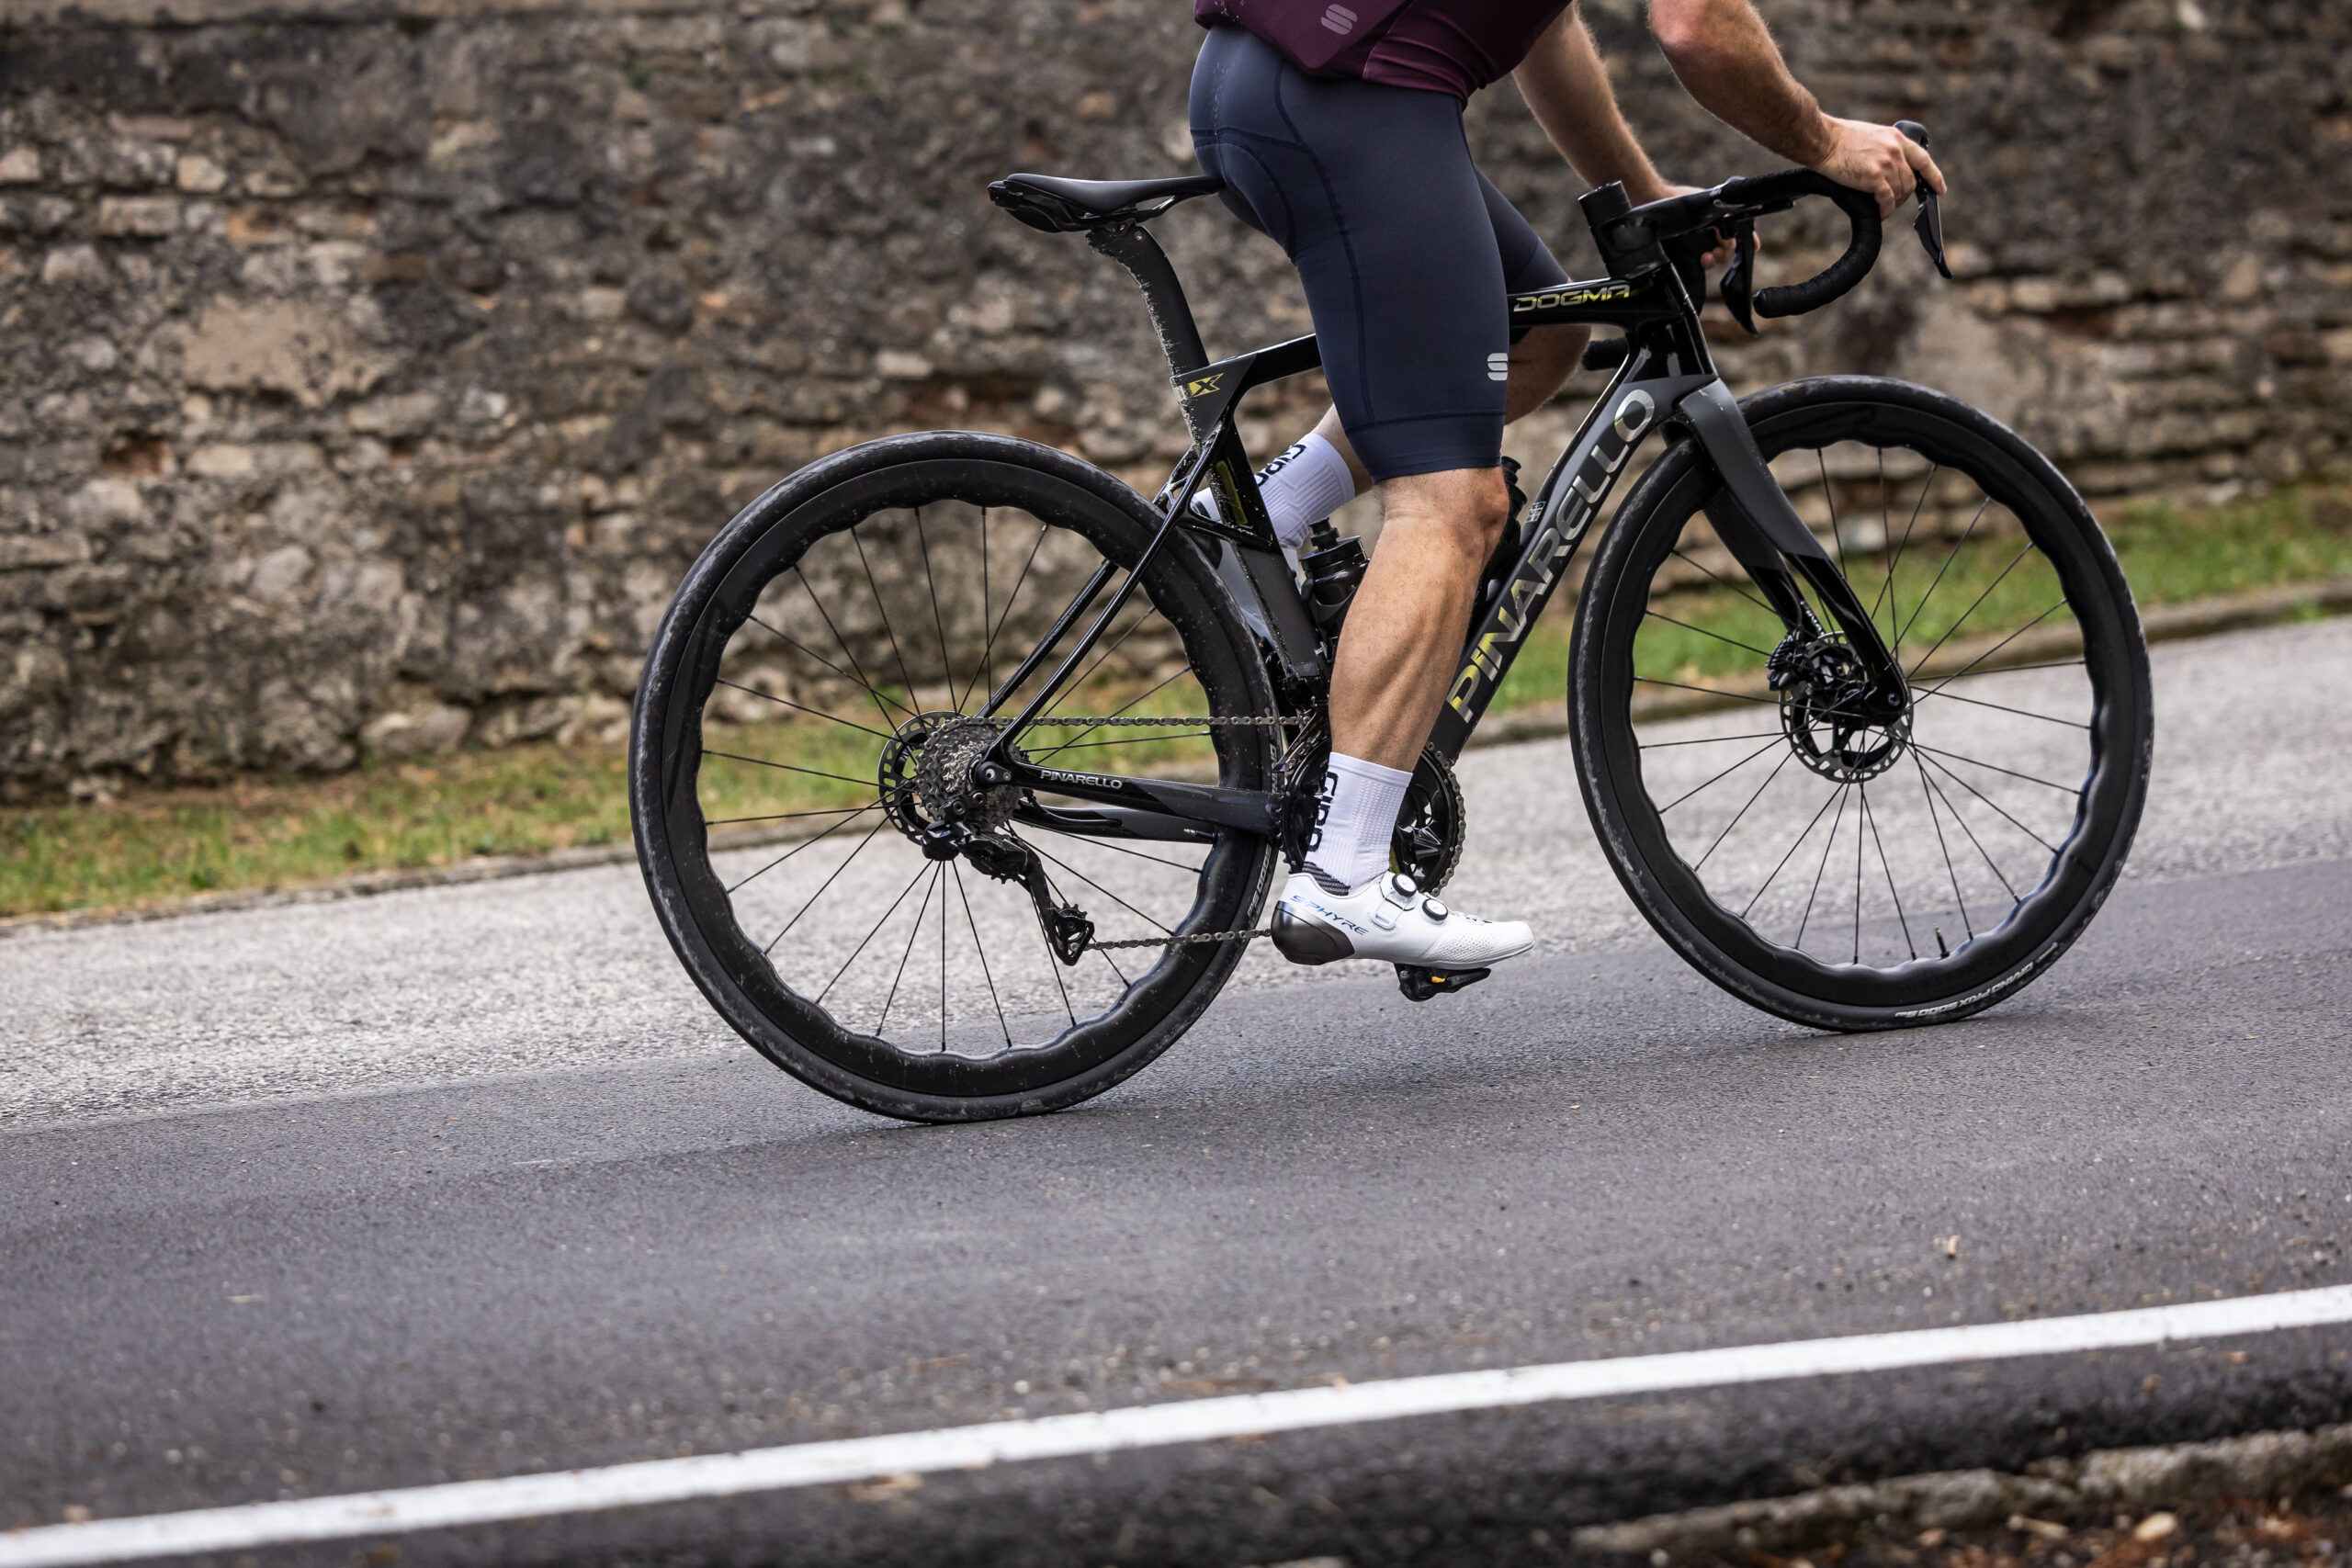 The brand new Pinarello DOGMA F on review - Fast on principle